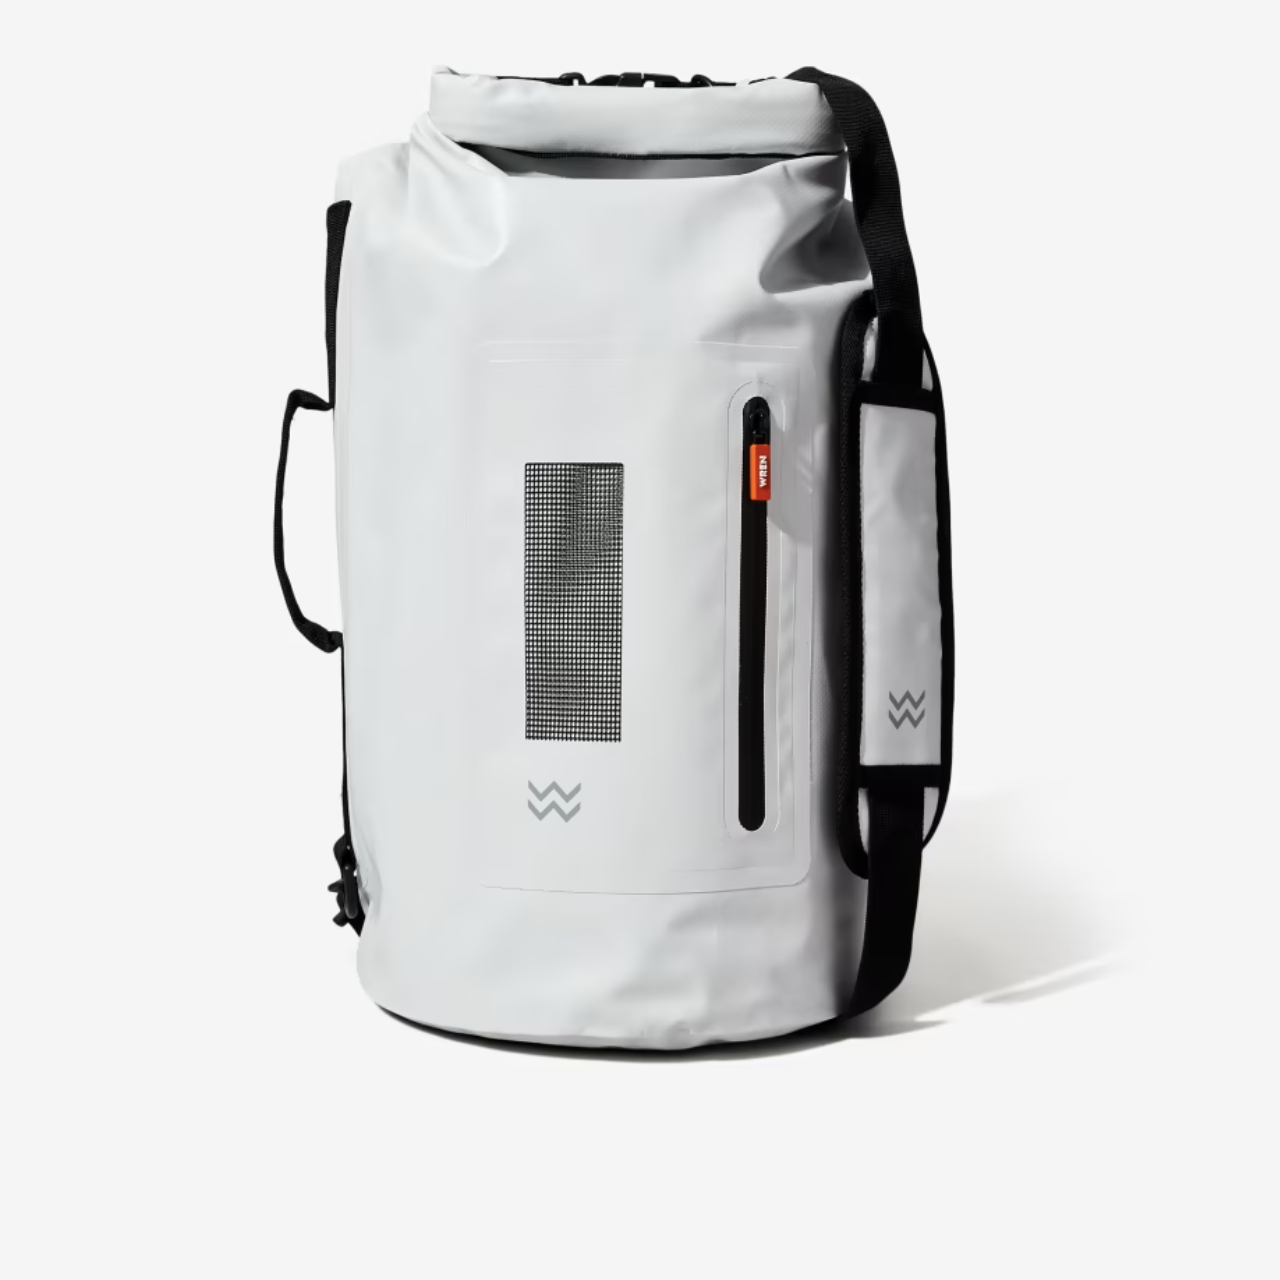 Cooler bag with front zipper, handle, and strap